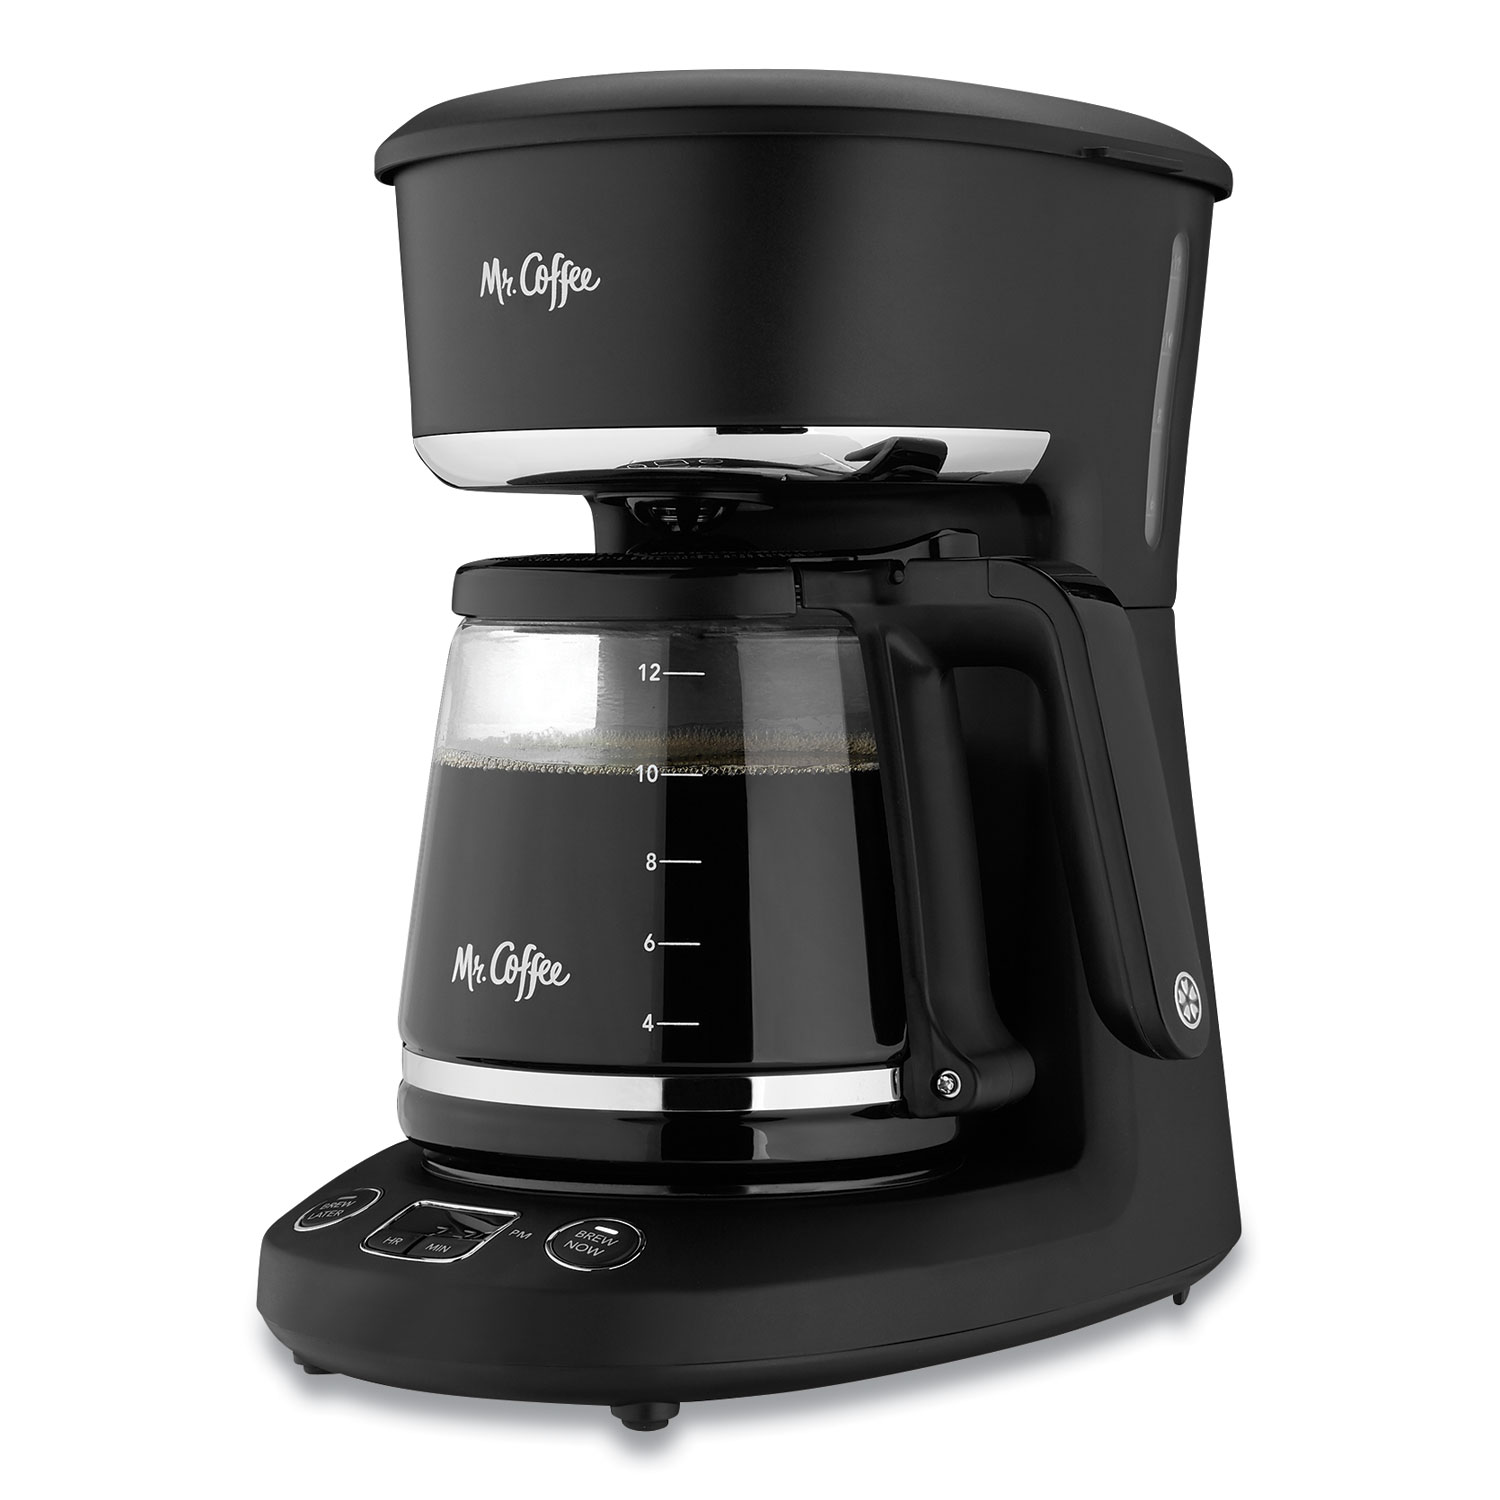 Mr. Coffee® 12-Cup Programmable Automatic Coffee Maker, Black/Chrome